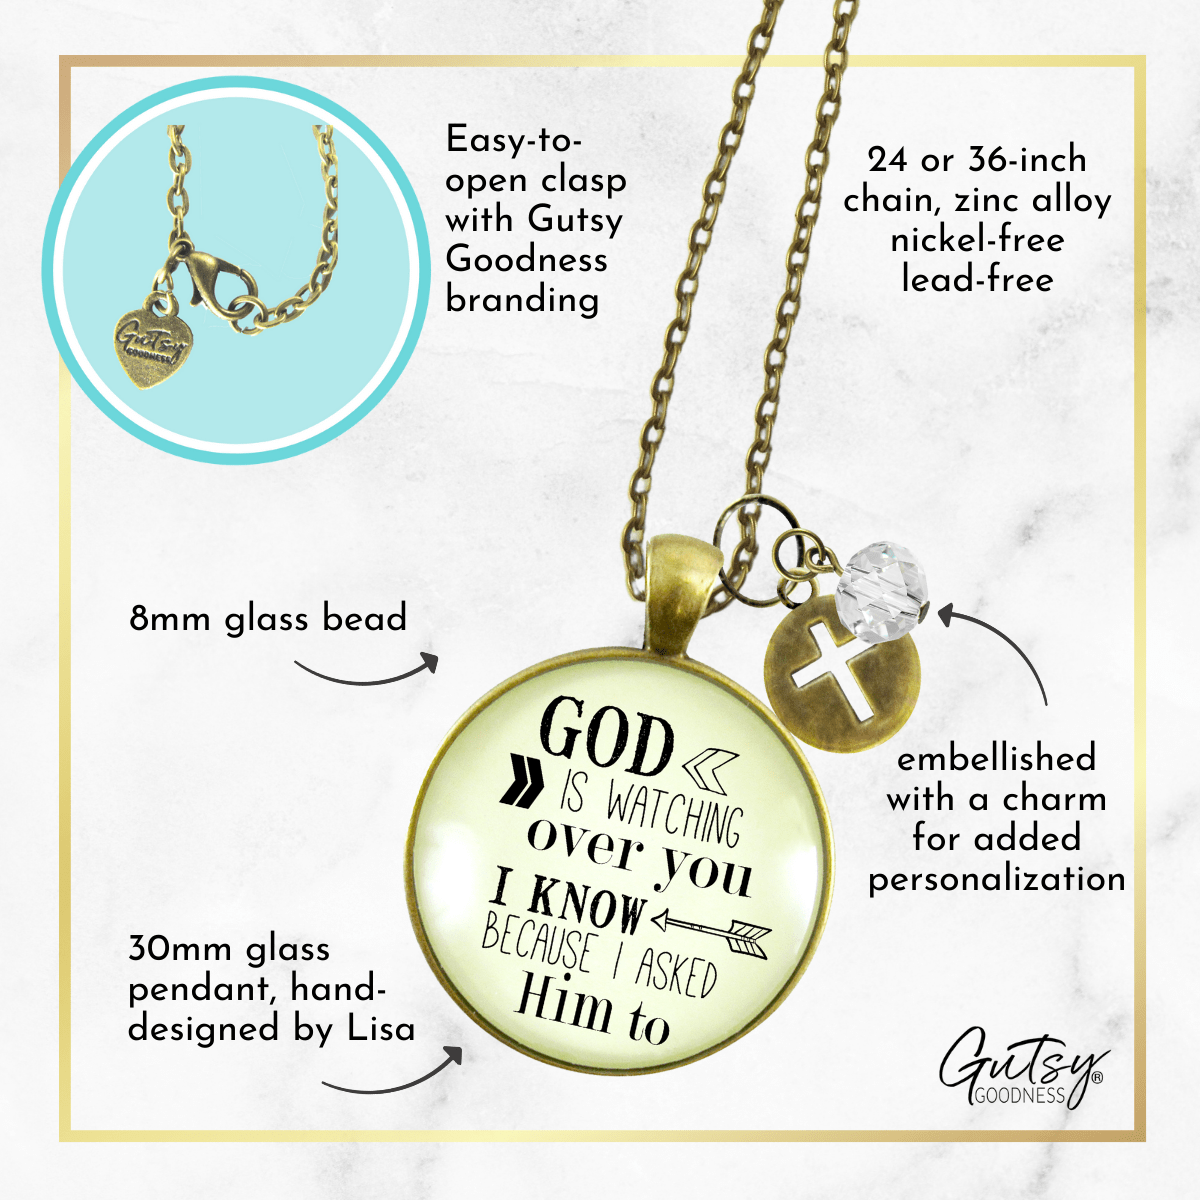 Gutsy Goodness Faith Necklace He is Watching Over You Vintage Charm Jewelry - Gutsy Goodness;Faith Necklace He Is Watching Over You Vintage Charm Jewelry - Gutsy Goodness Handmade Jewelry Gifts